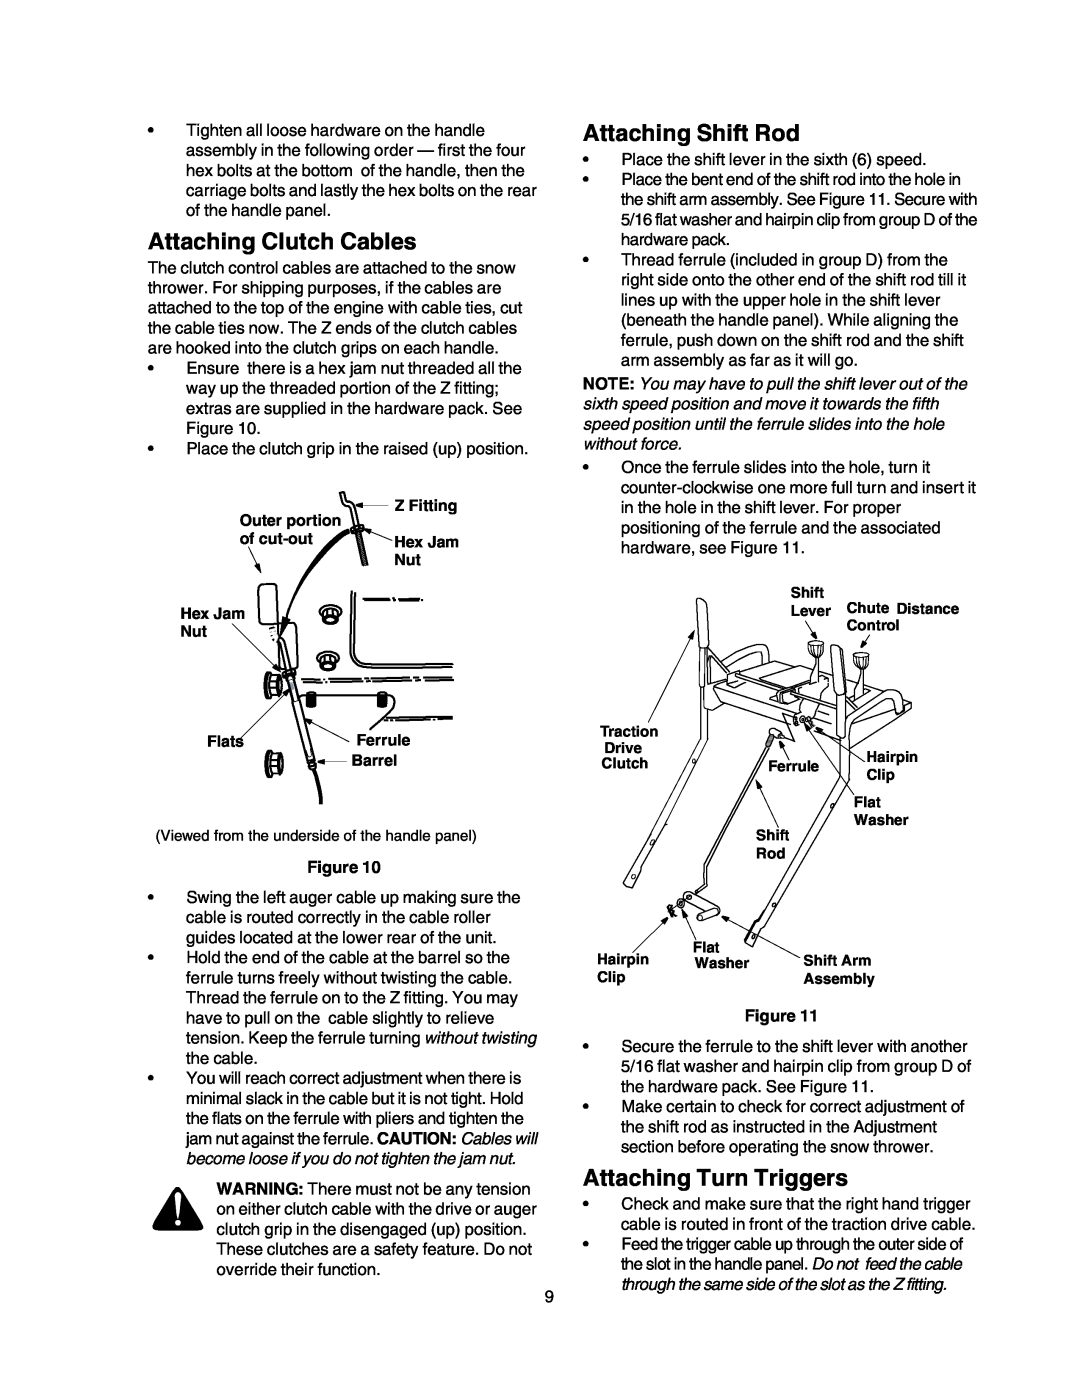 Craftsman 247.88853 owner manual Attaching Clutch Cables, Attaching Shift Rod, Attaching Turn Triggers 